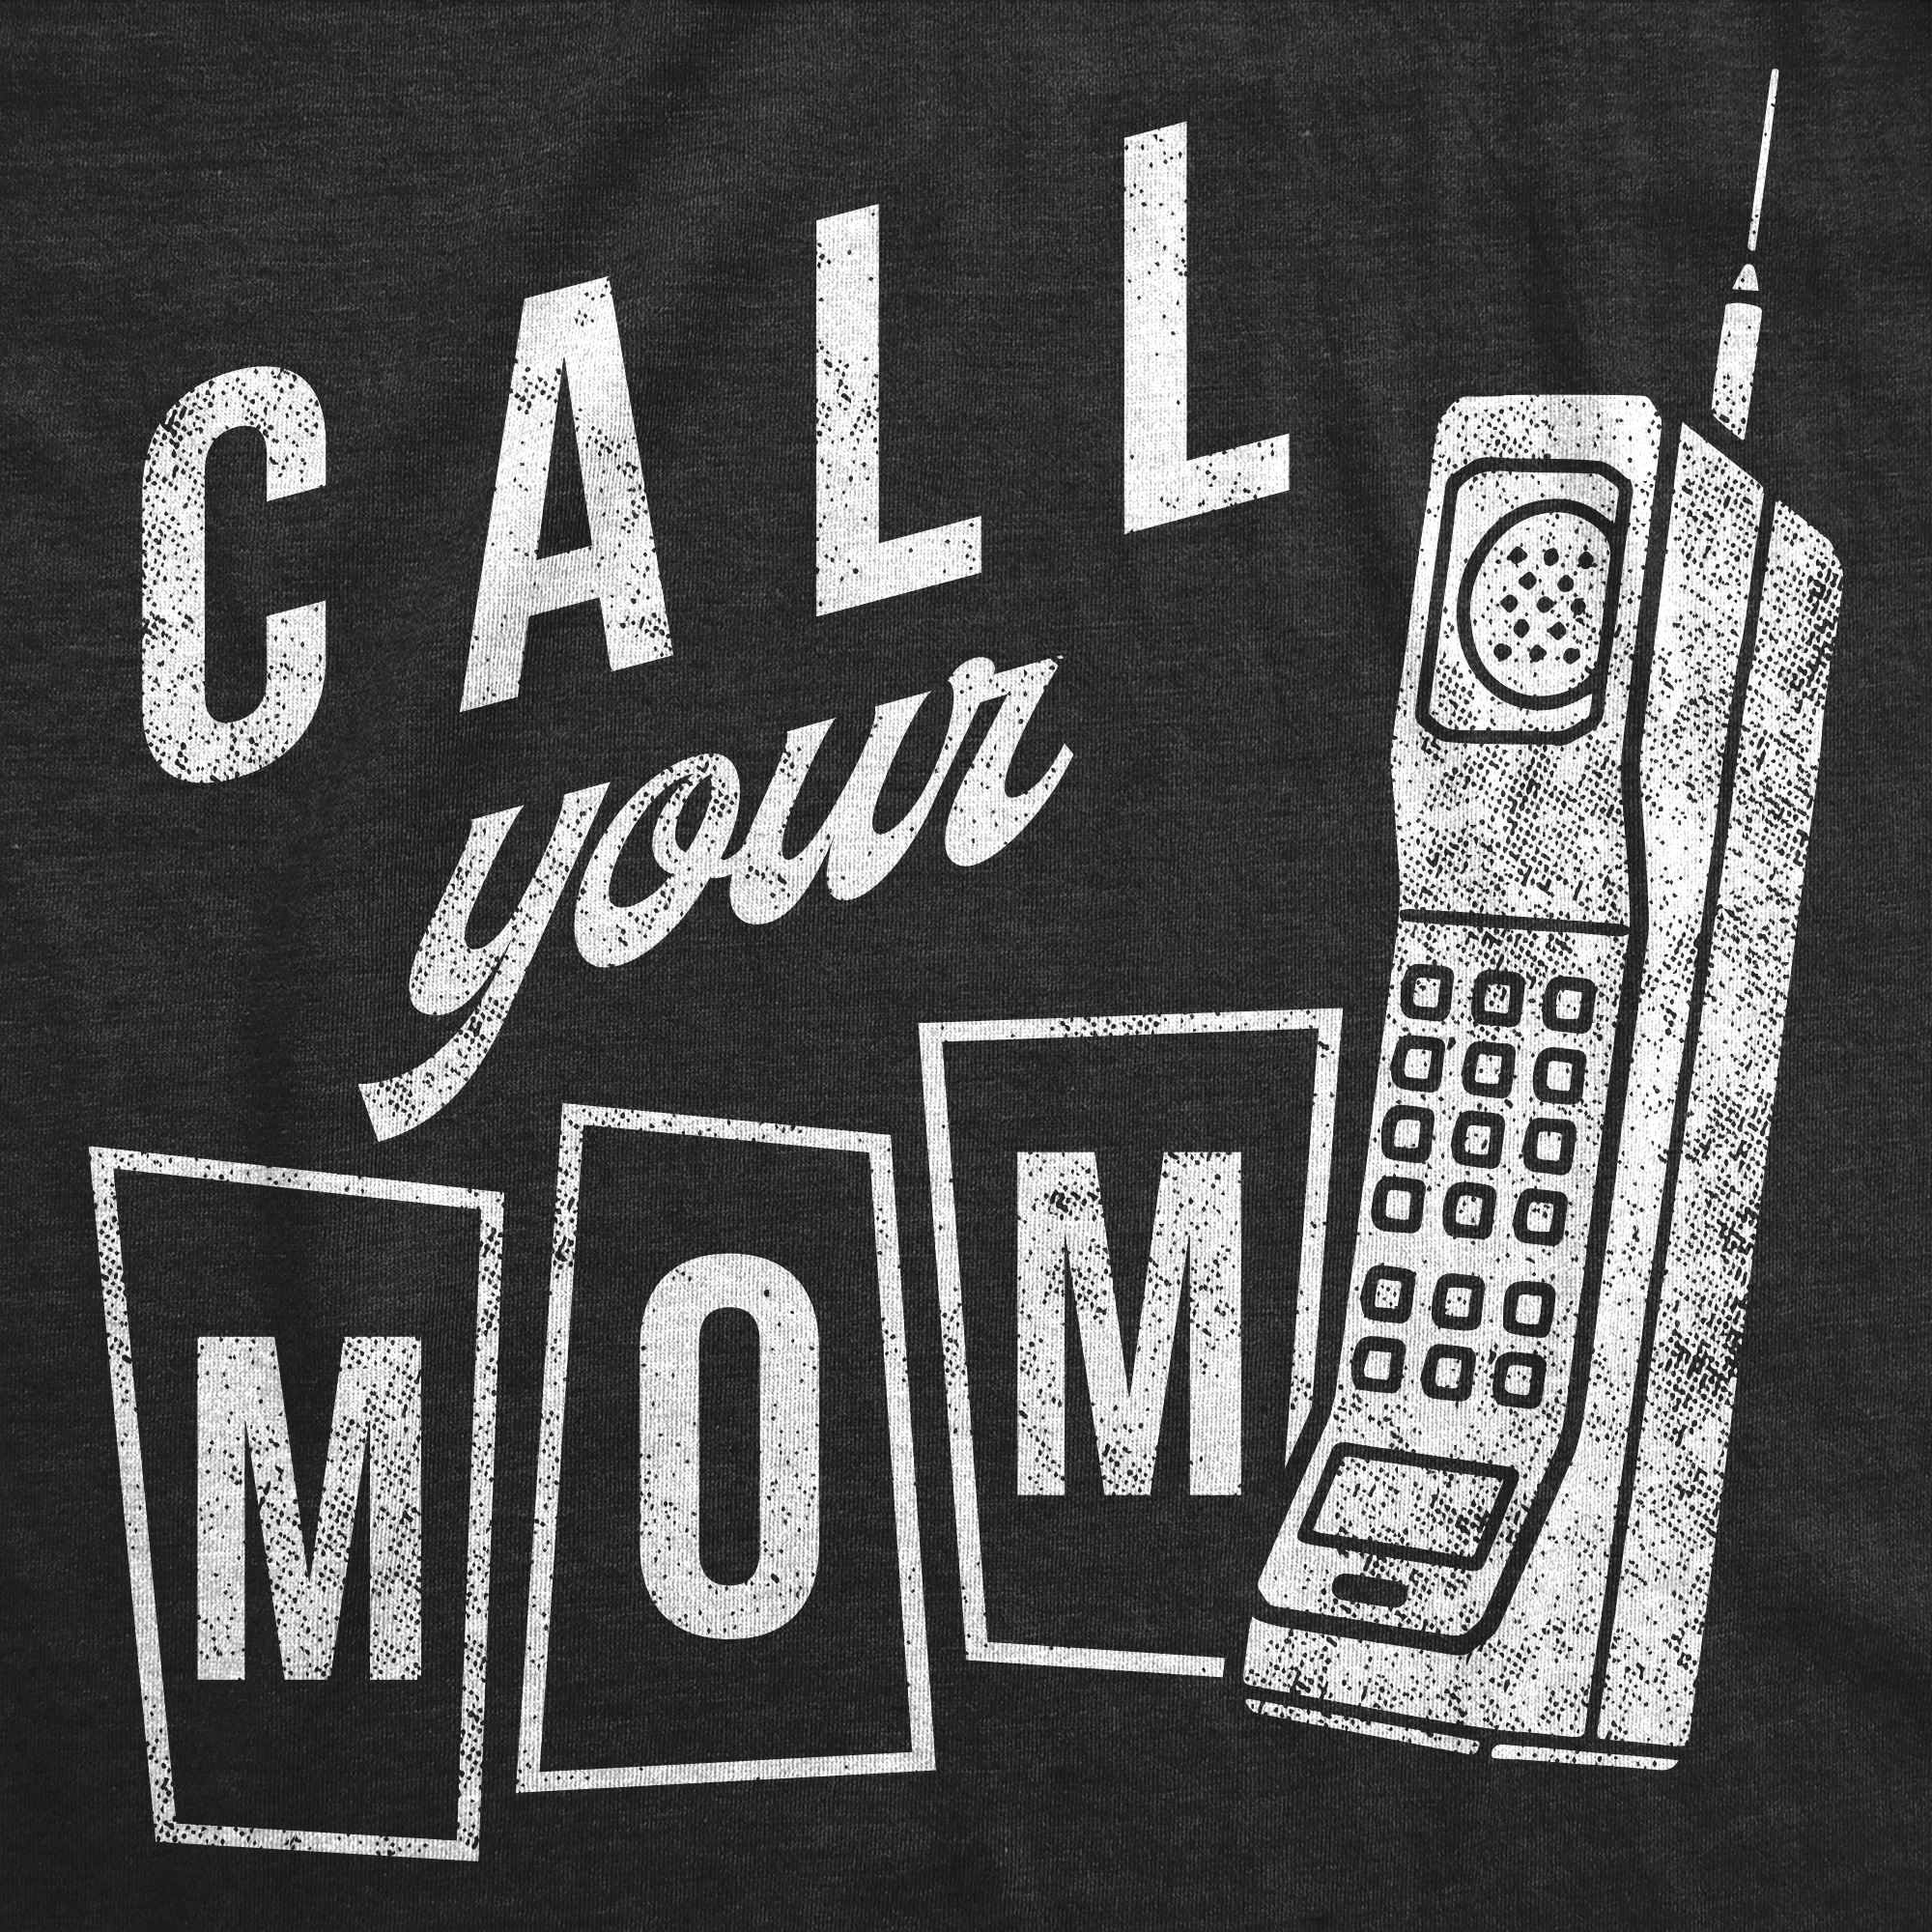 Funny Heather Black - Call Your Mom Call Your Mom Womens T Shirt Nerdy sarcastic Tee